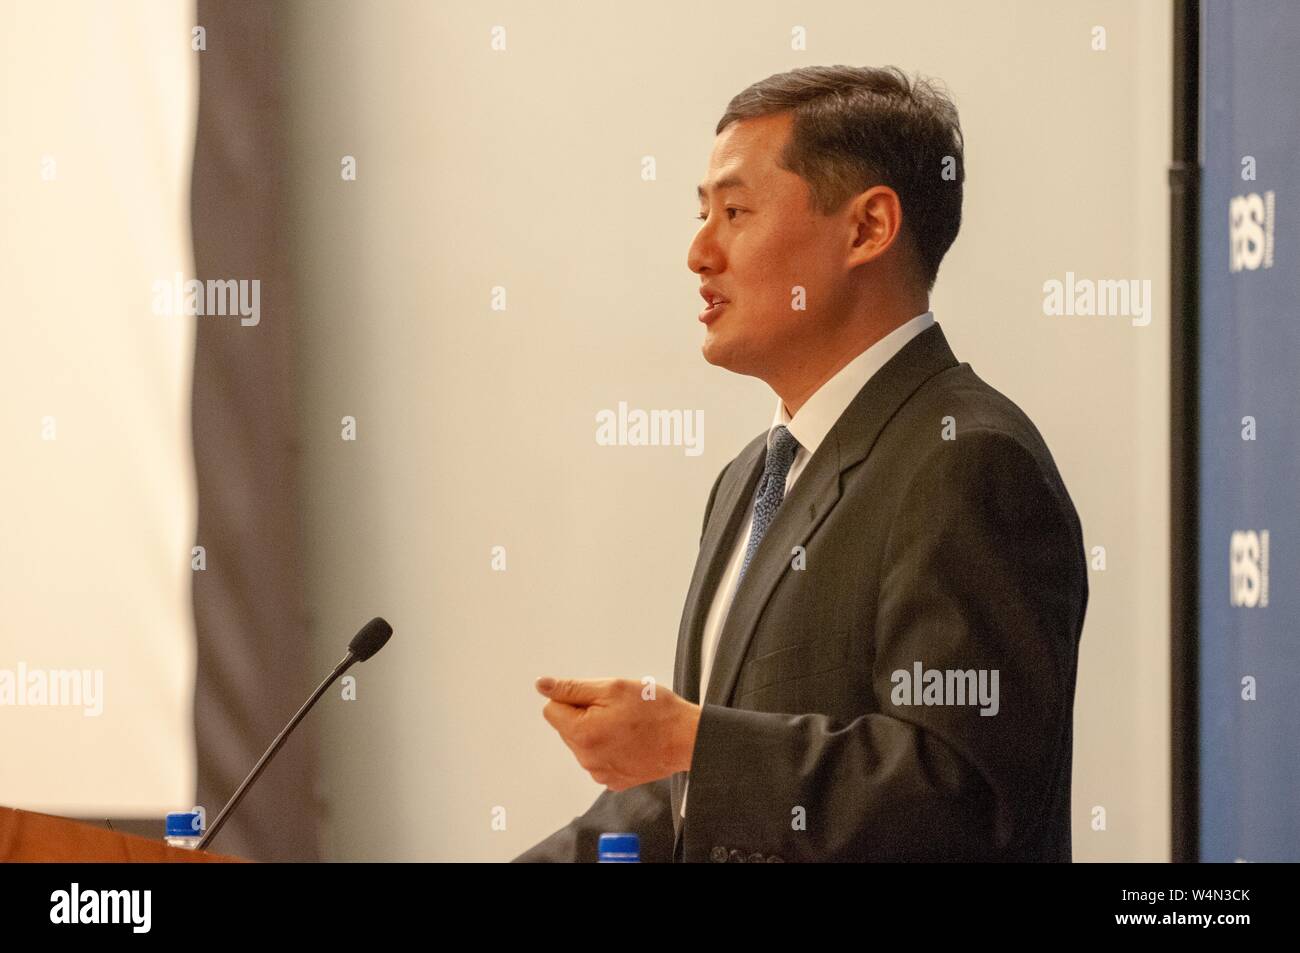 Politician John Yoo speaks during a Foreign Affairs Symposium at the Johns Hopkins University in Baltimore, Maryland, February 17, 2010. From the Homewood Photography collection. () Stock Photo